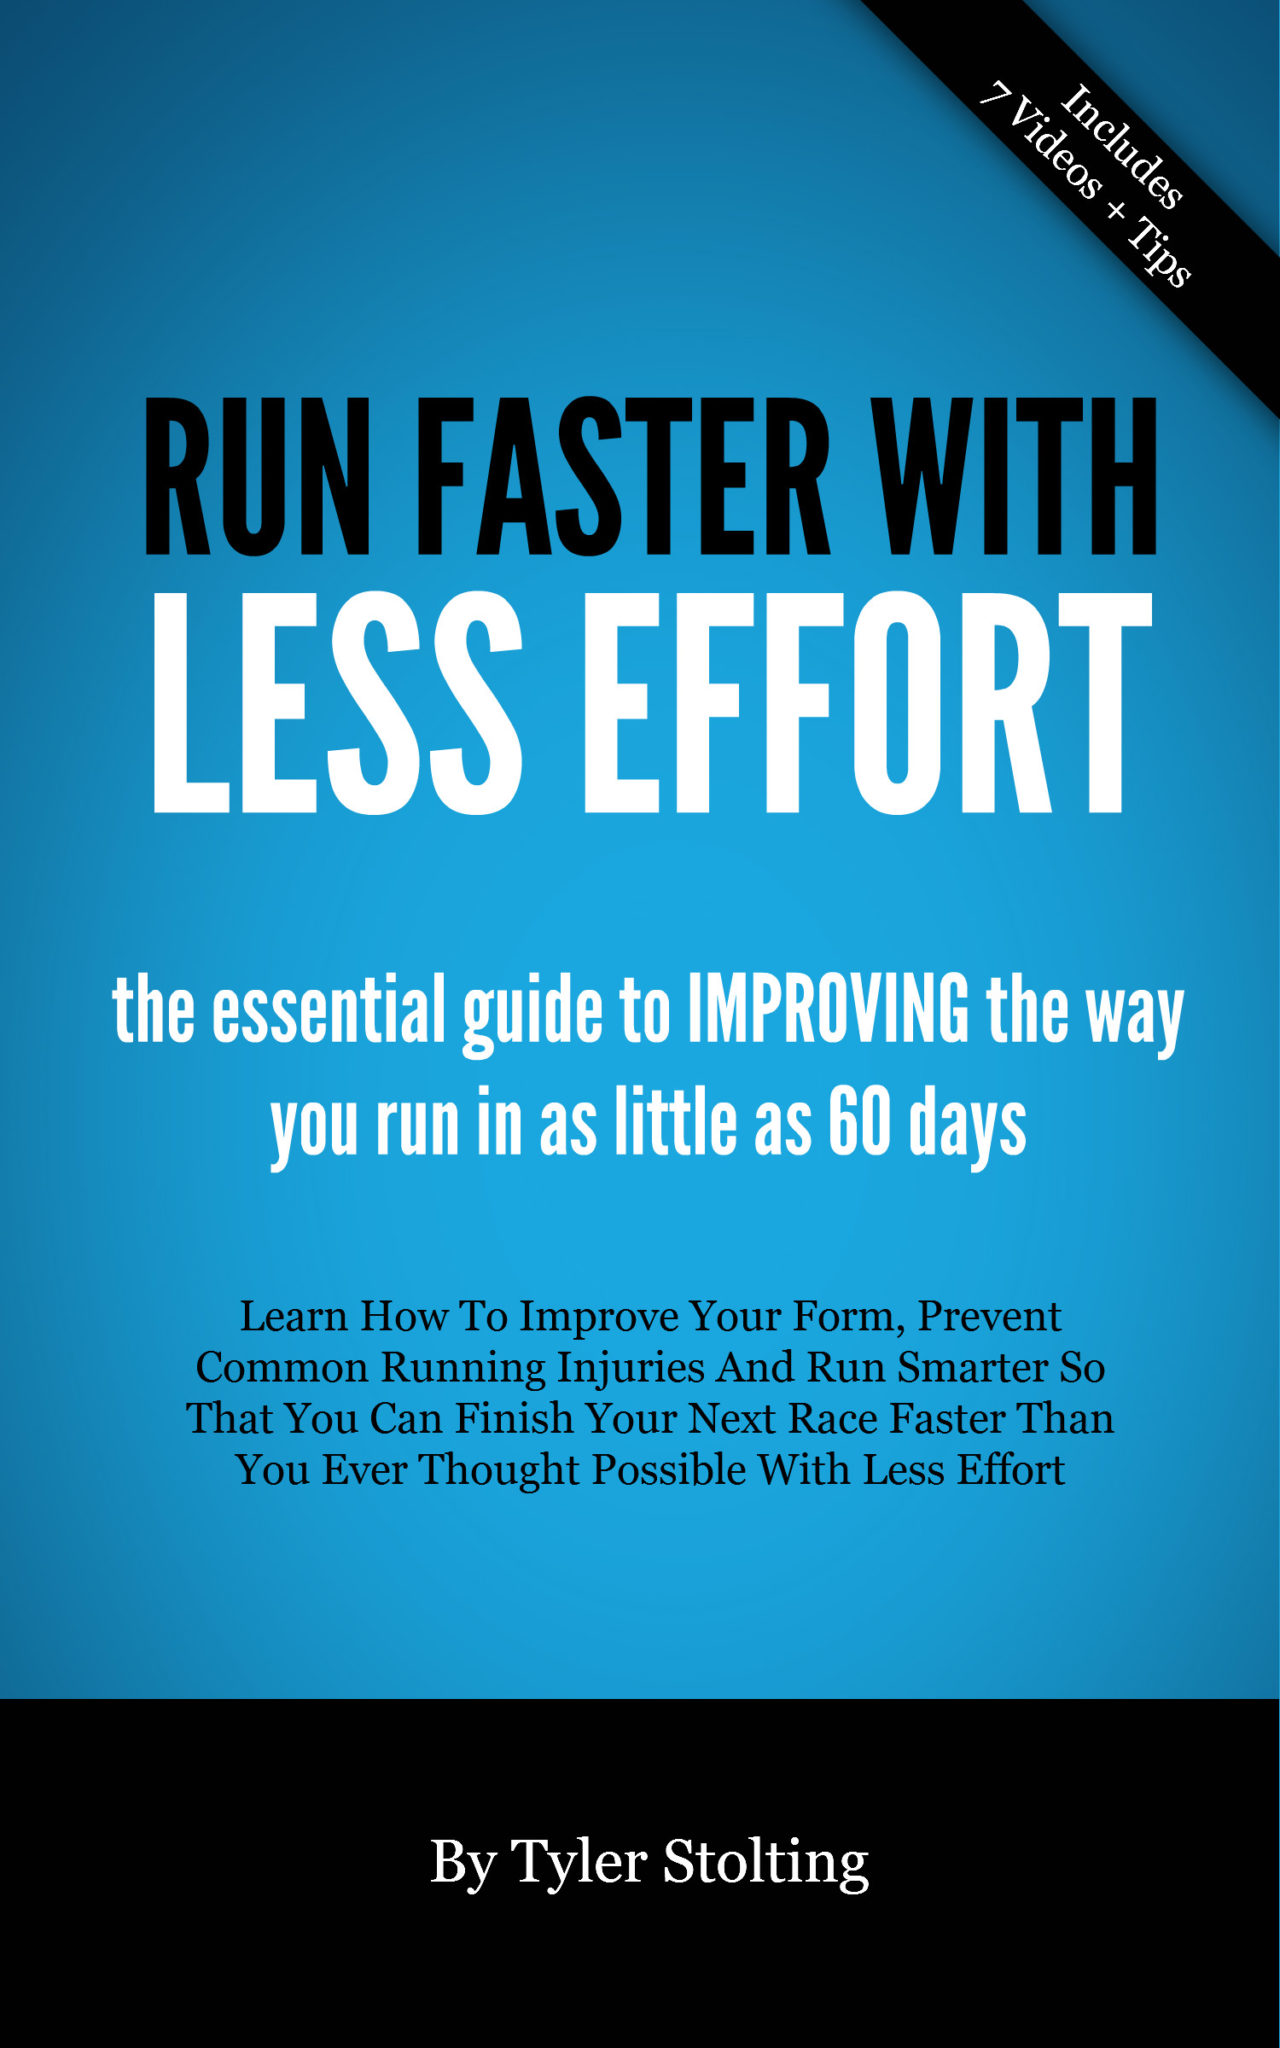 FREE: Run Faster With Less Effort: The Essential Guide to Learning How to Run Faster in as Little as 60 Days by Tyler Stolting